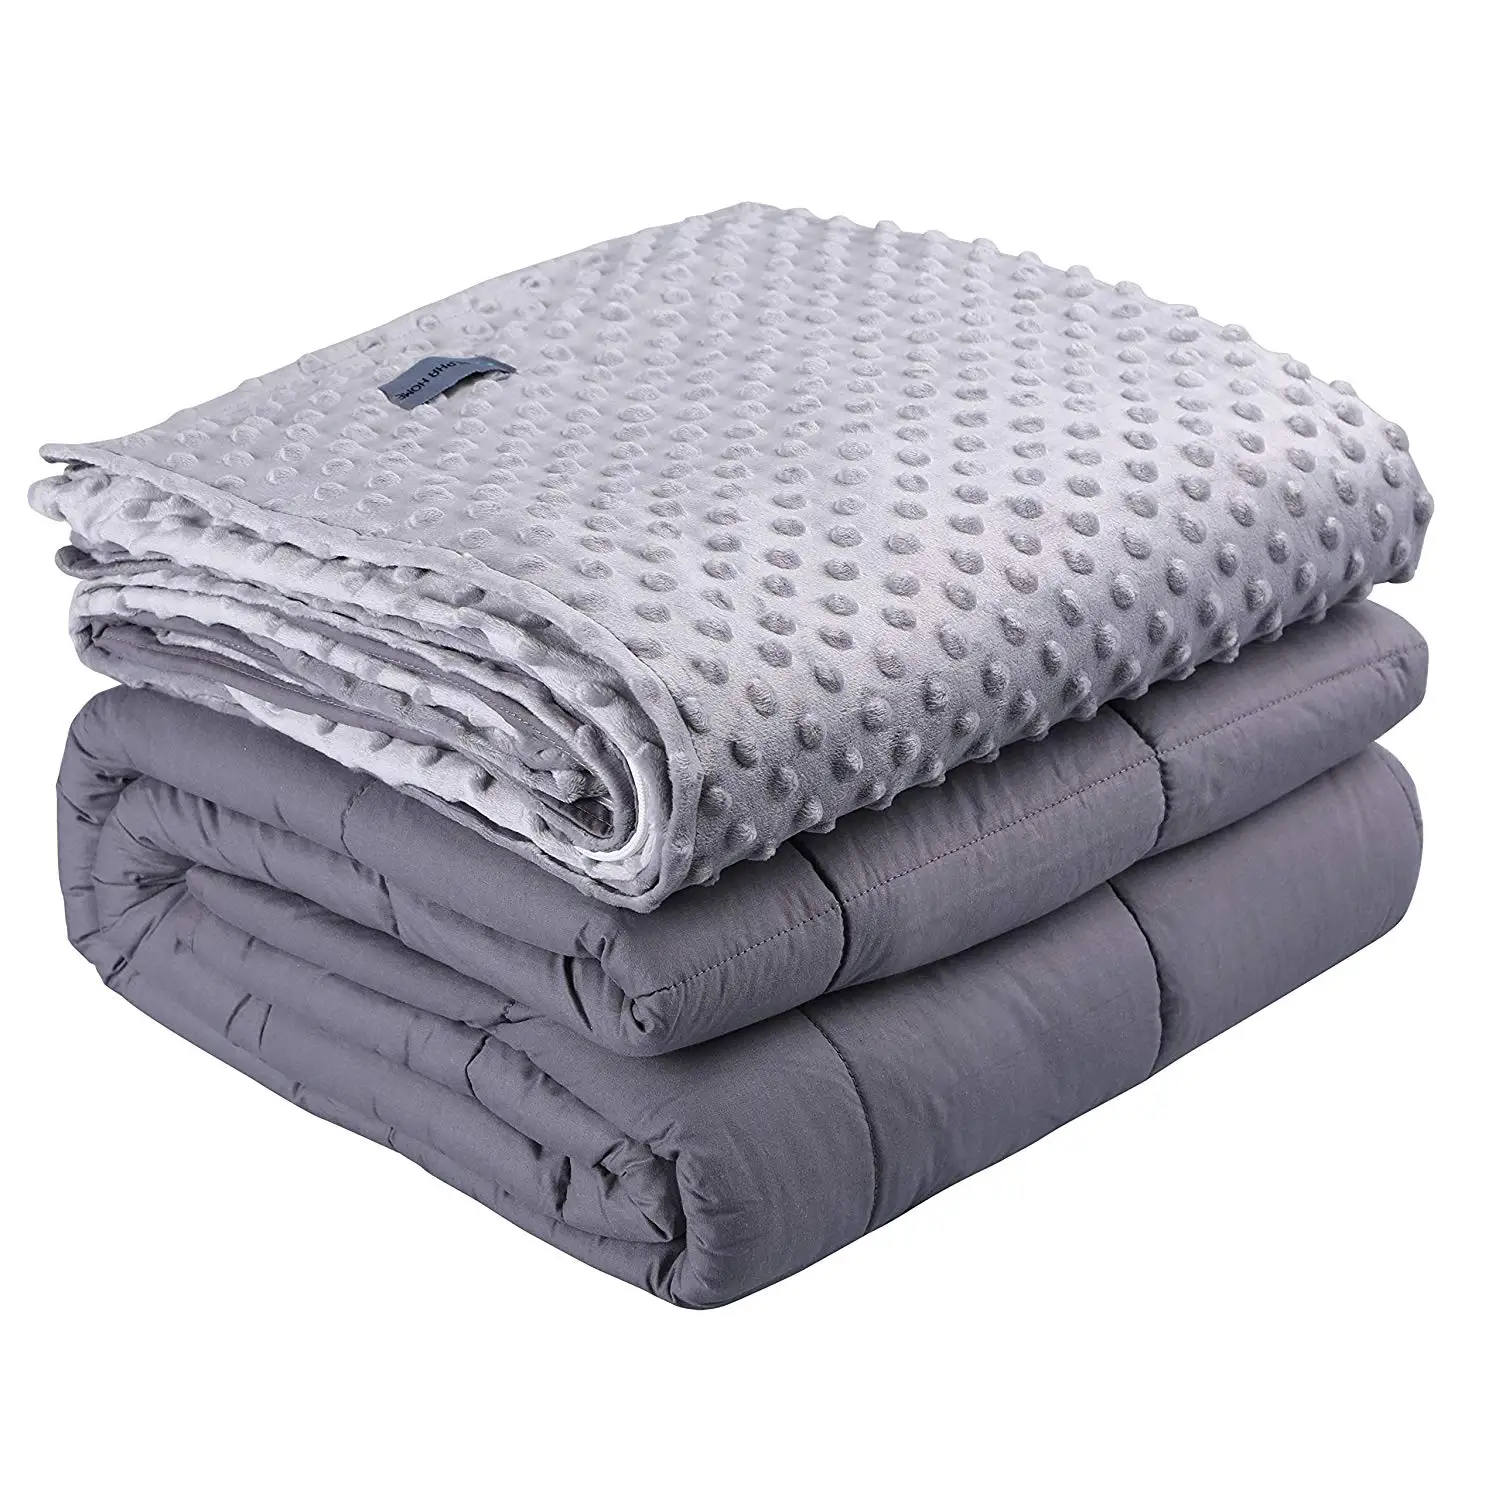 Buy Weighted Dog Anti Anxiety Blanket Wrap For Stress Relief and